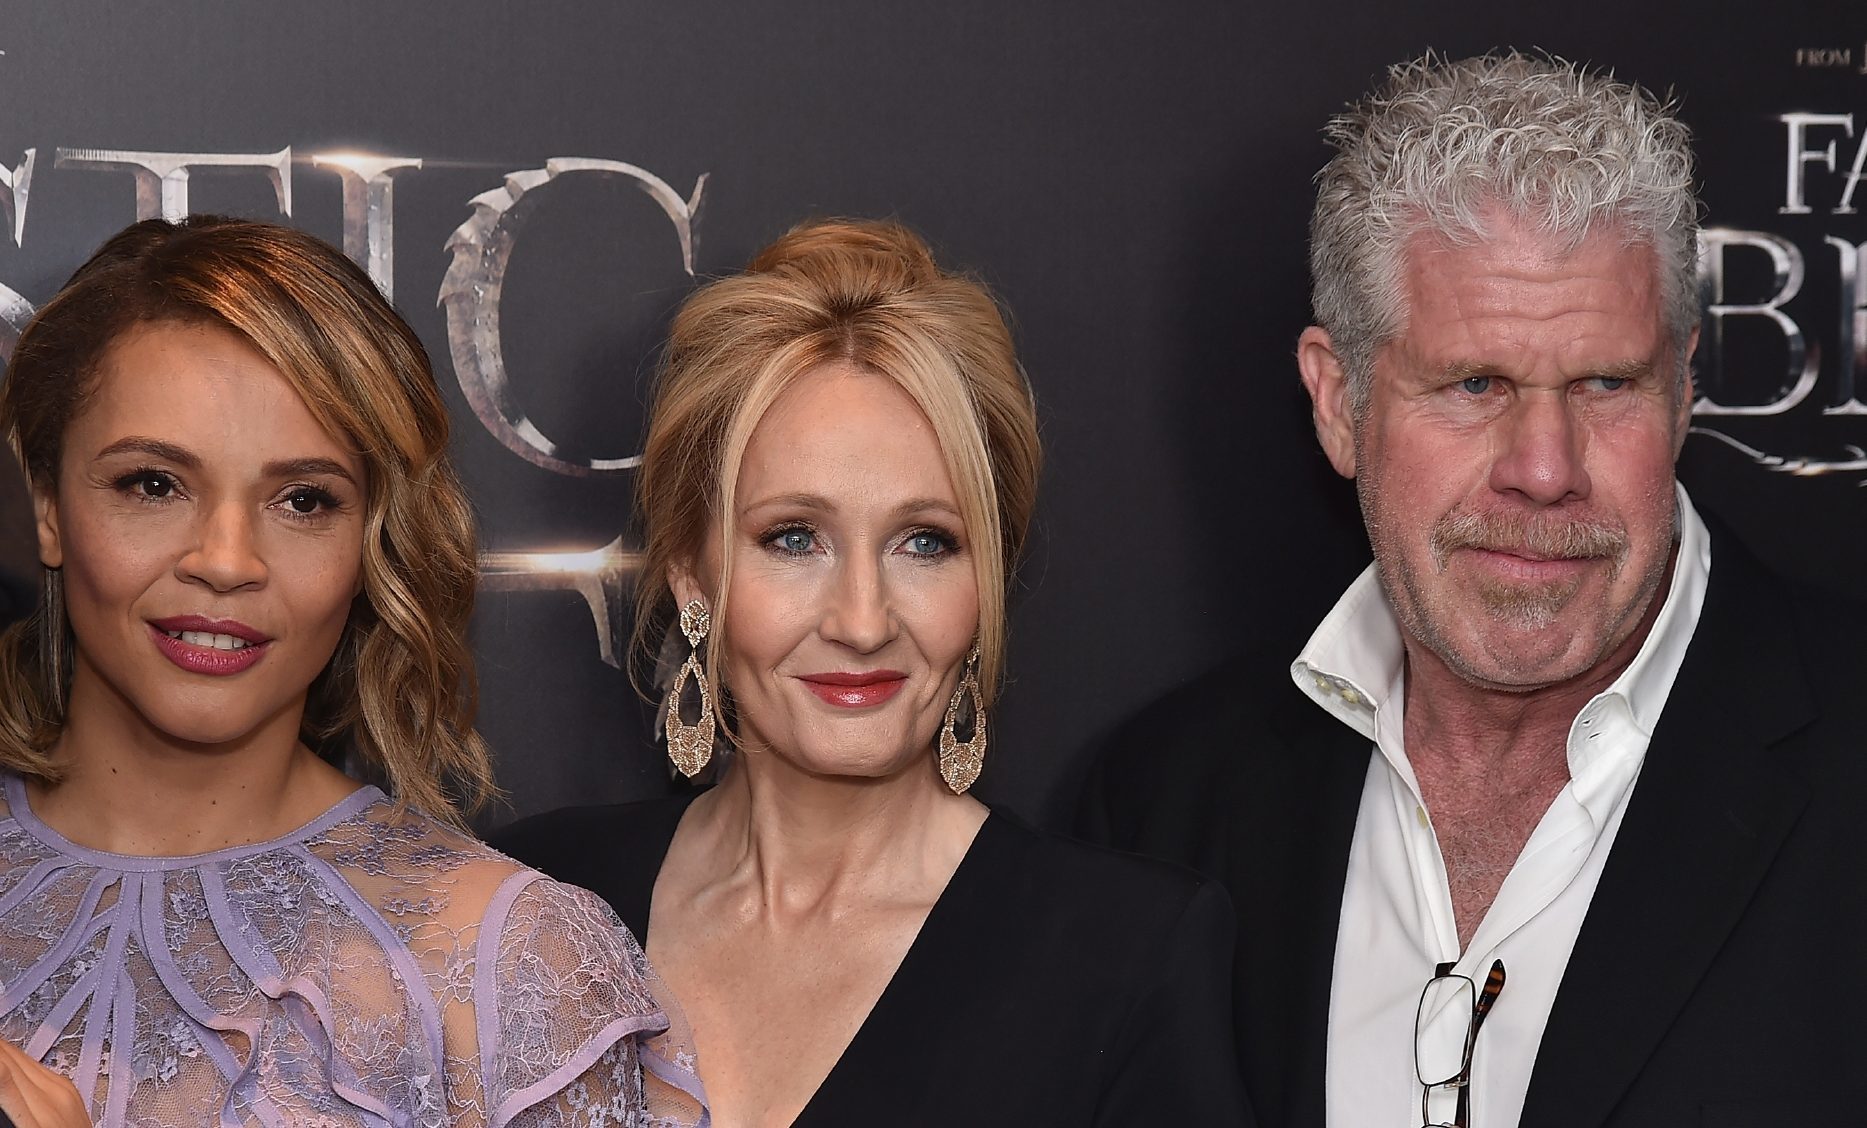 Carmen Ejogo, JK.Rowling and Ron Perlman at the premiere in New York.